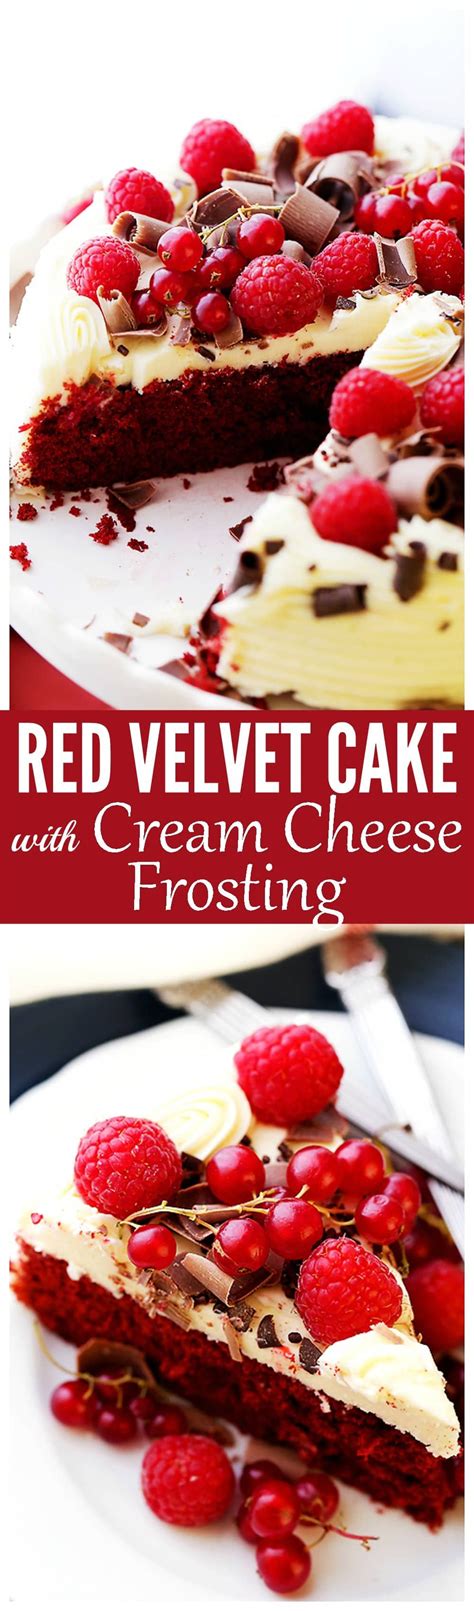 For the best favor, use within a month. Red Velvet Cake with Cream Cheese Frosting - Moist, spongy ...